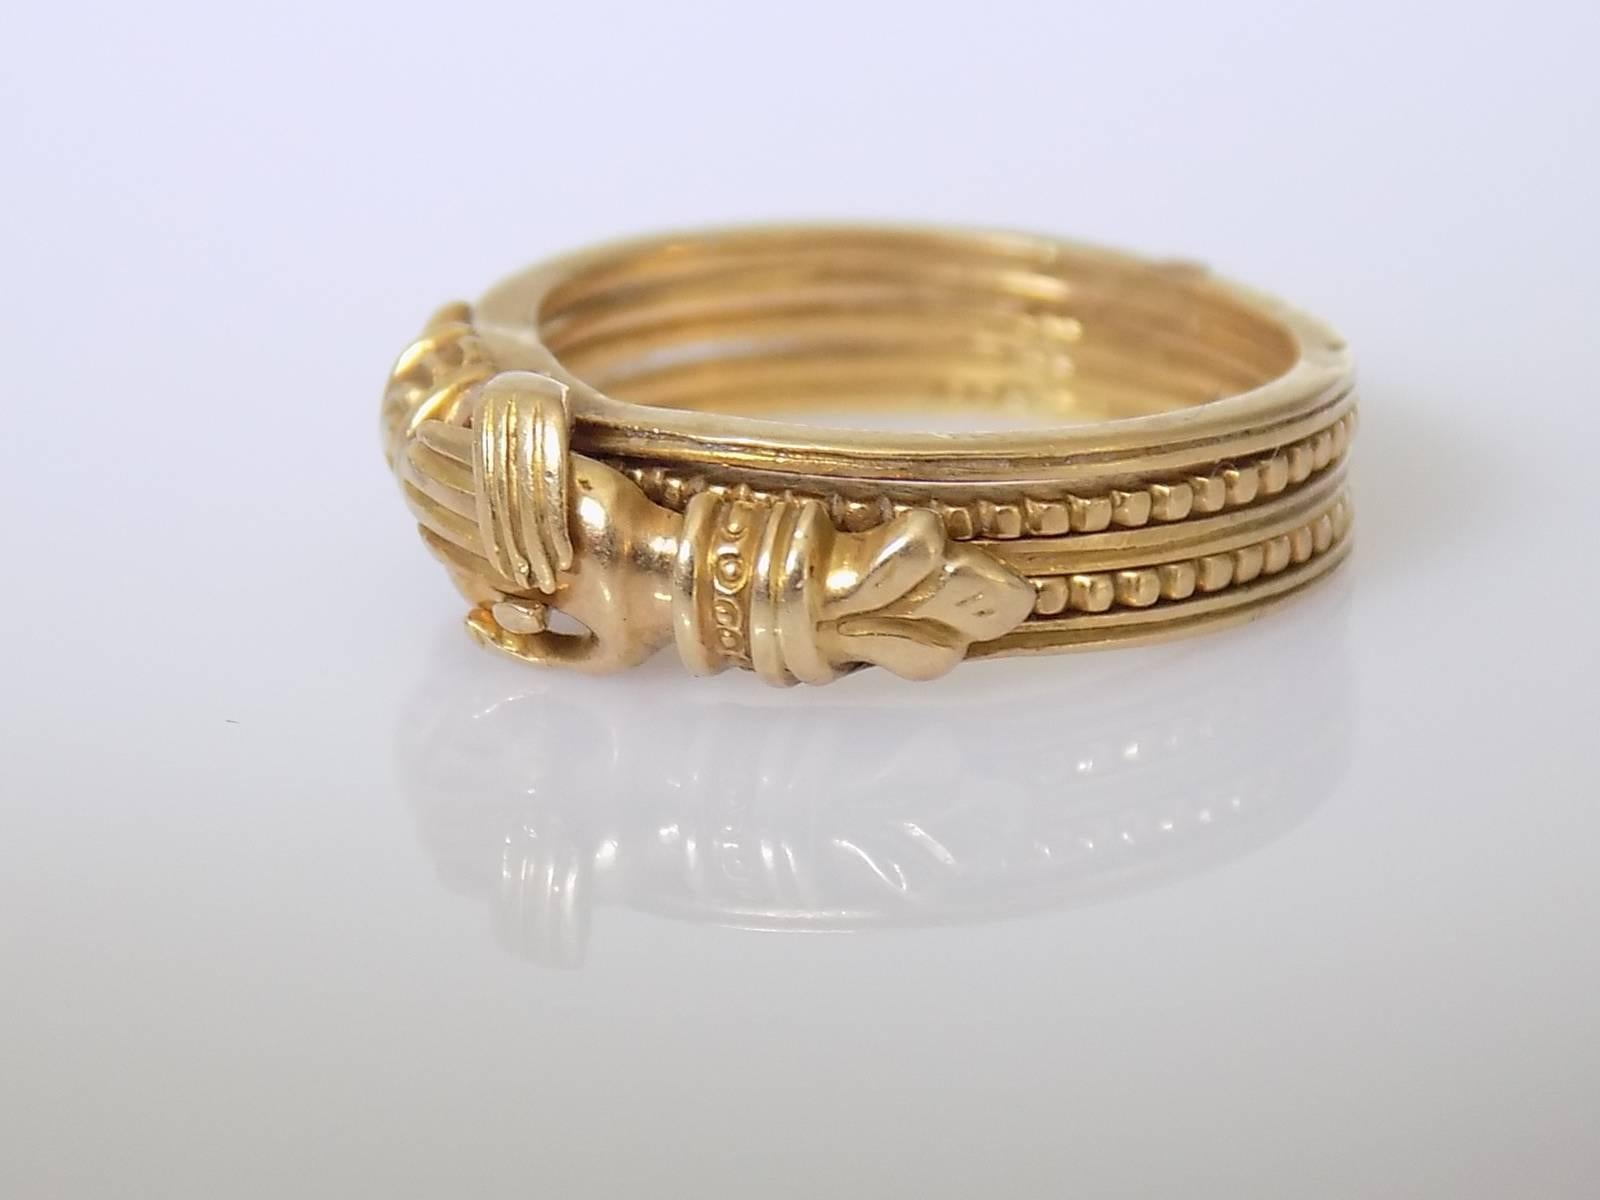 An Outstanding Georgian c.1790s 18 Carat Gold Gimmel Fede ring with beautiful details on the cuffs.  An unusual thing about this ring it`s made not of  two or three rings as traditional Gimmel rings, it`s made of five individual rings jointed